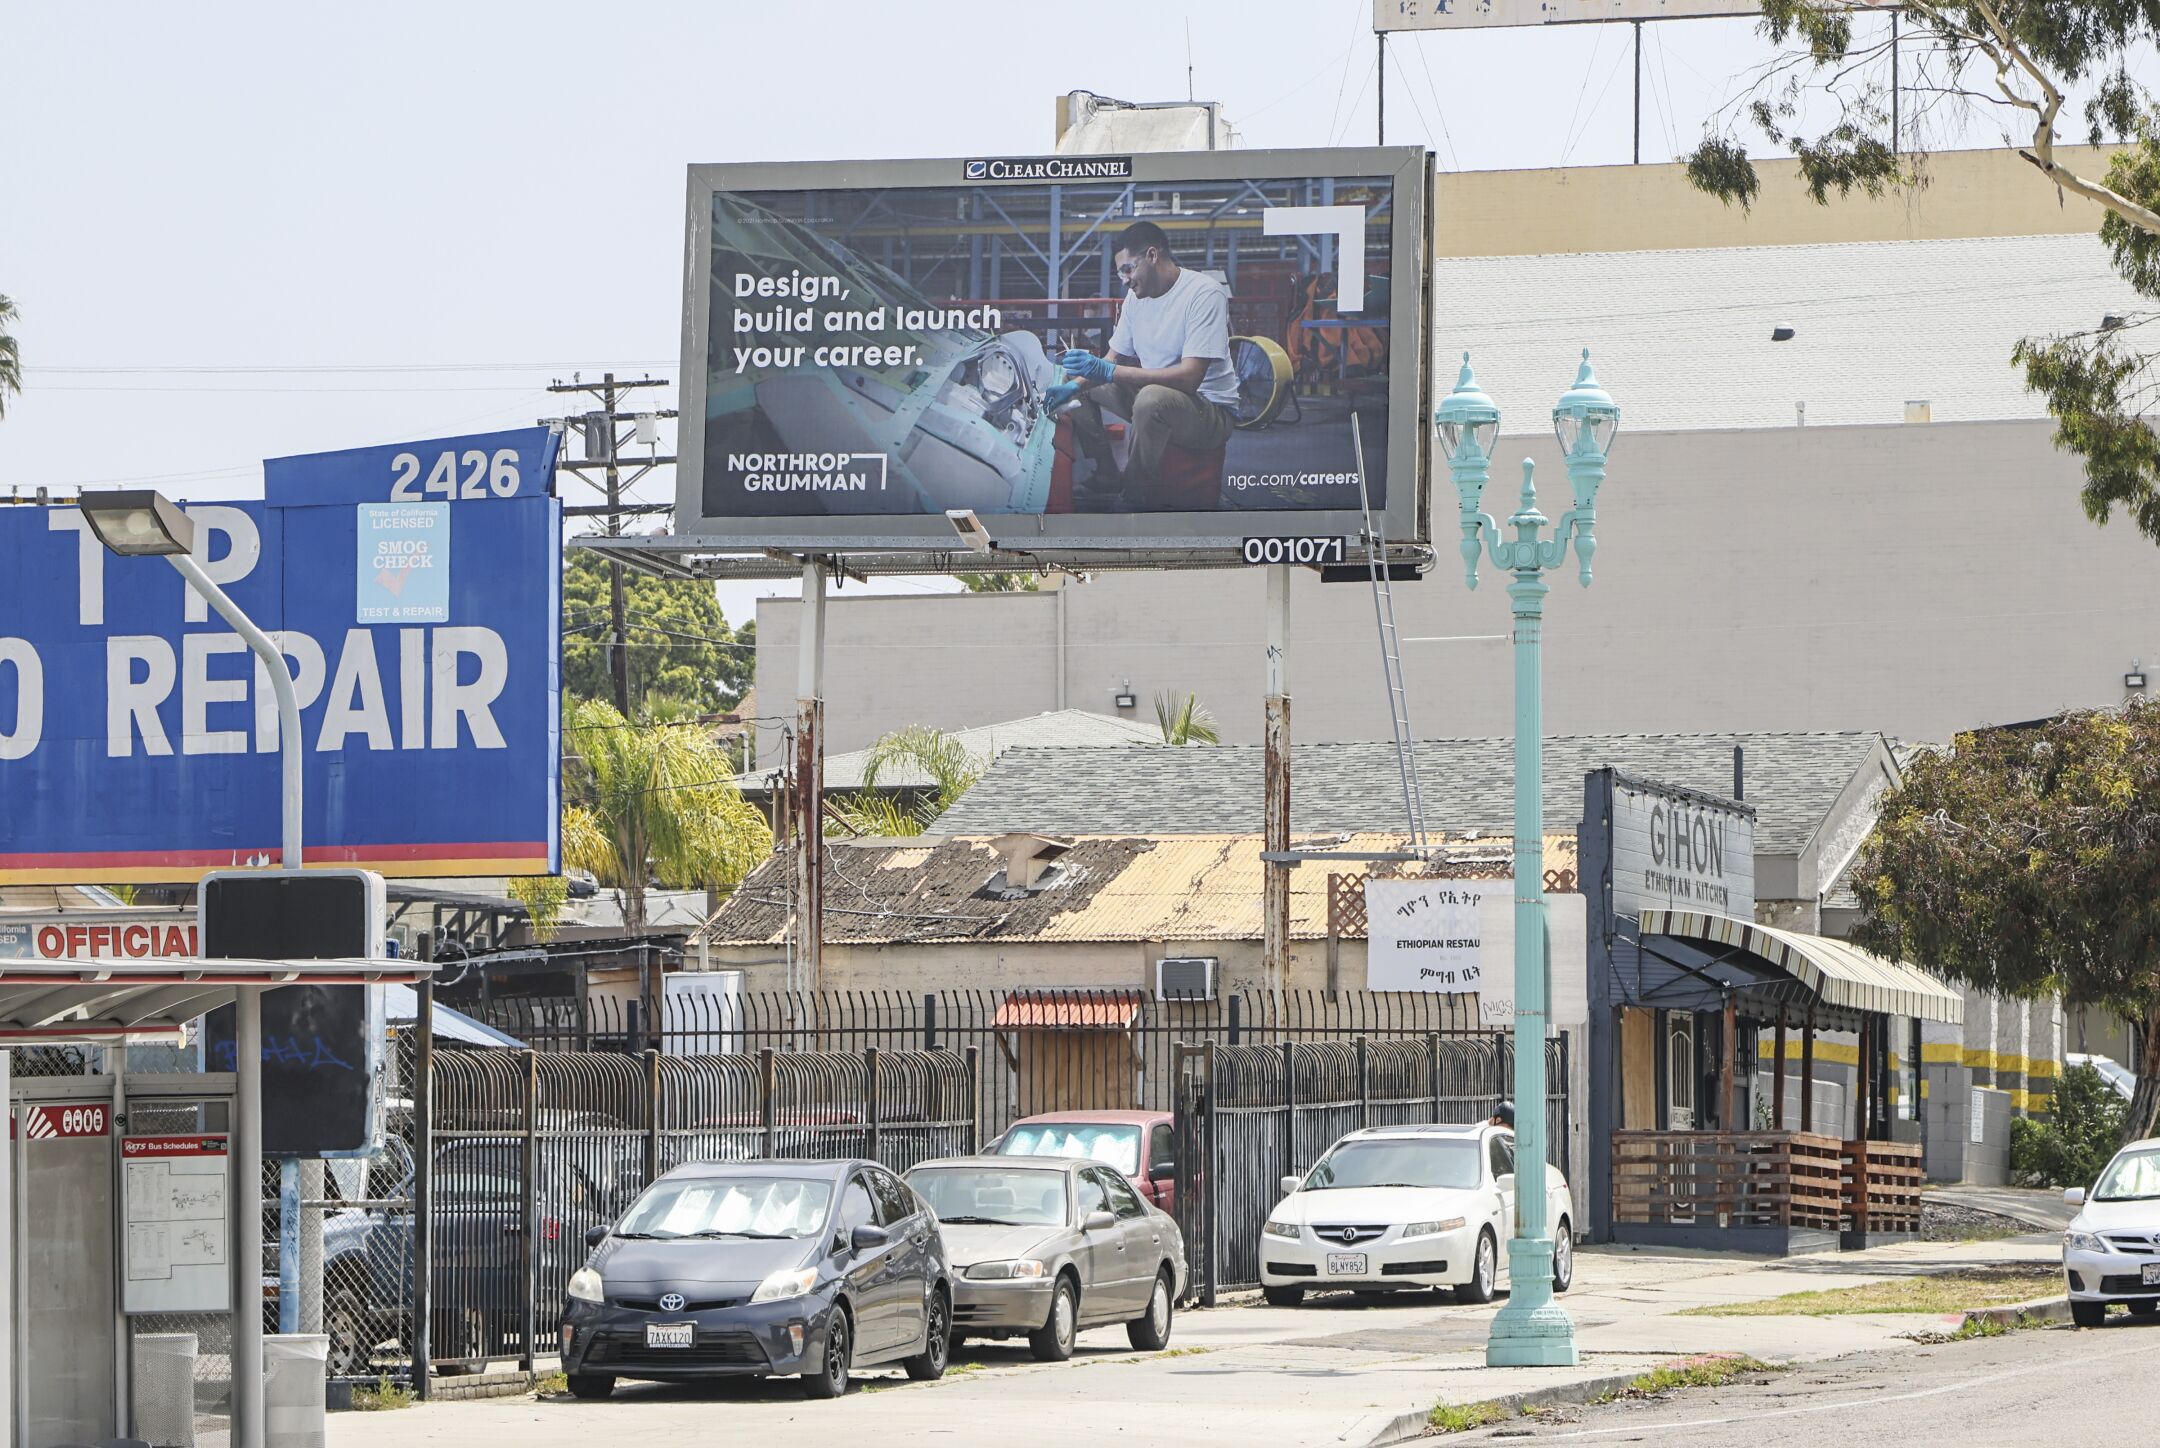 San Diego region is national model for strict billboard rules, fighting